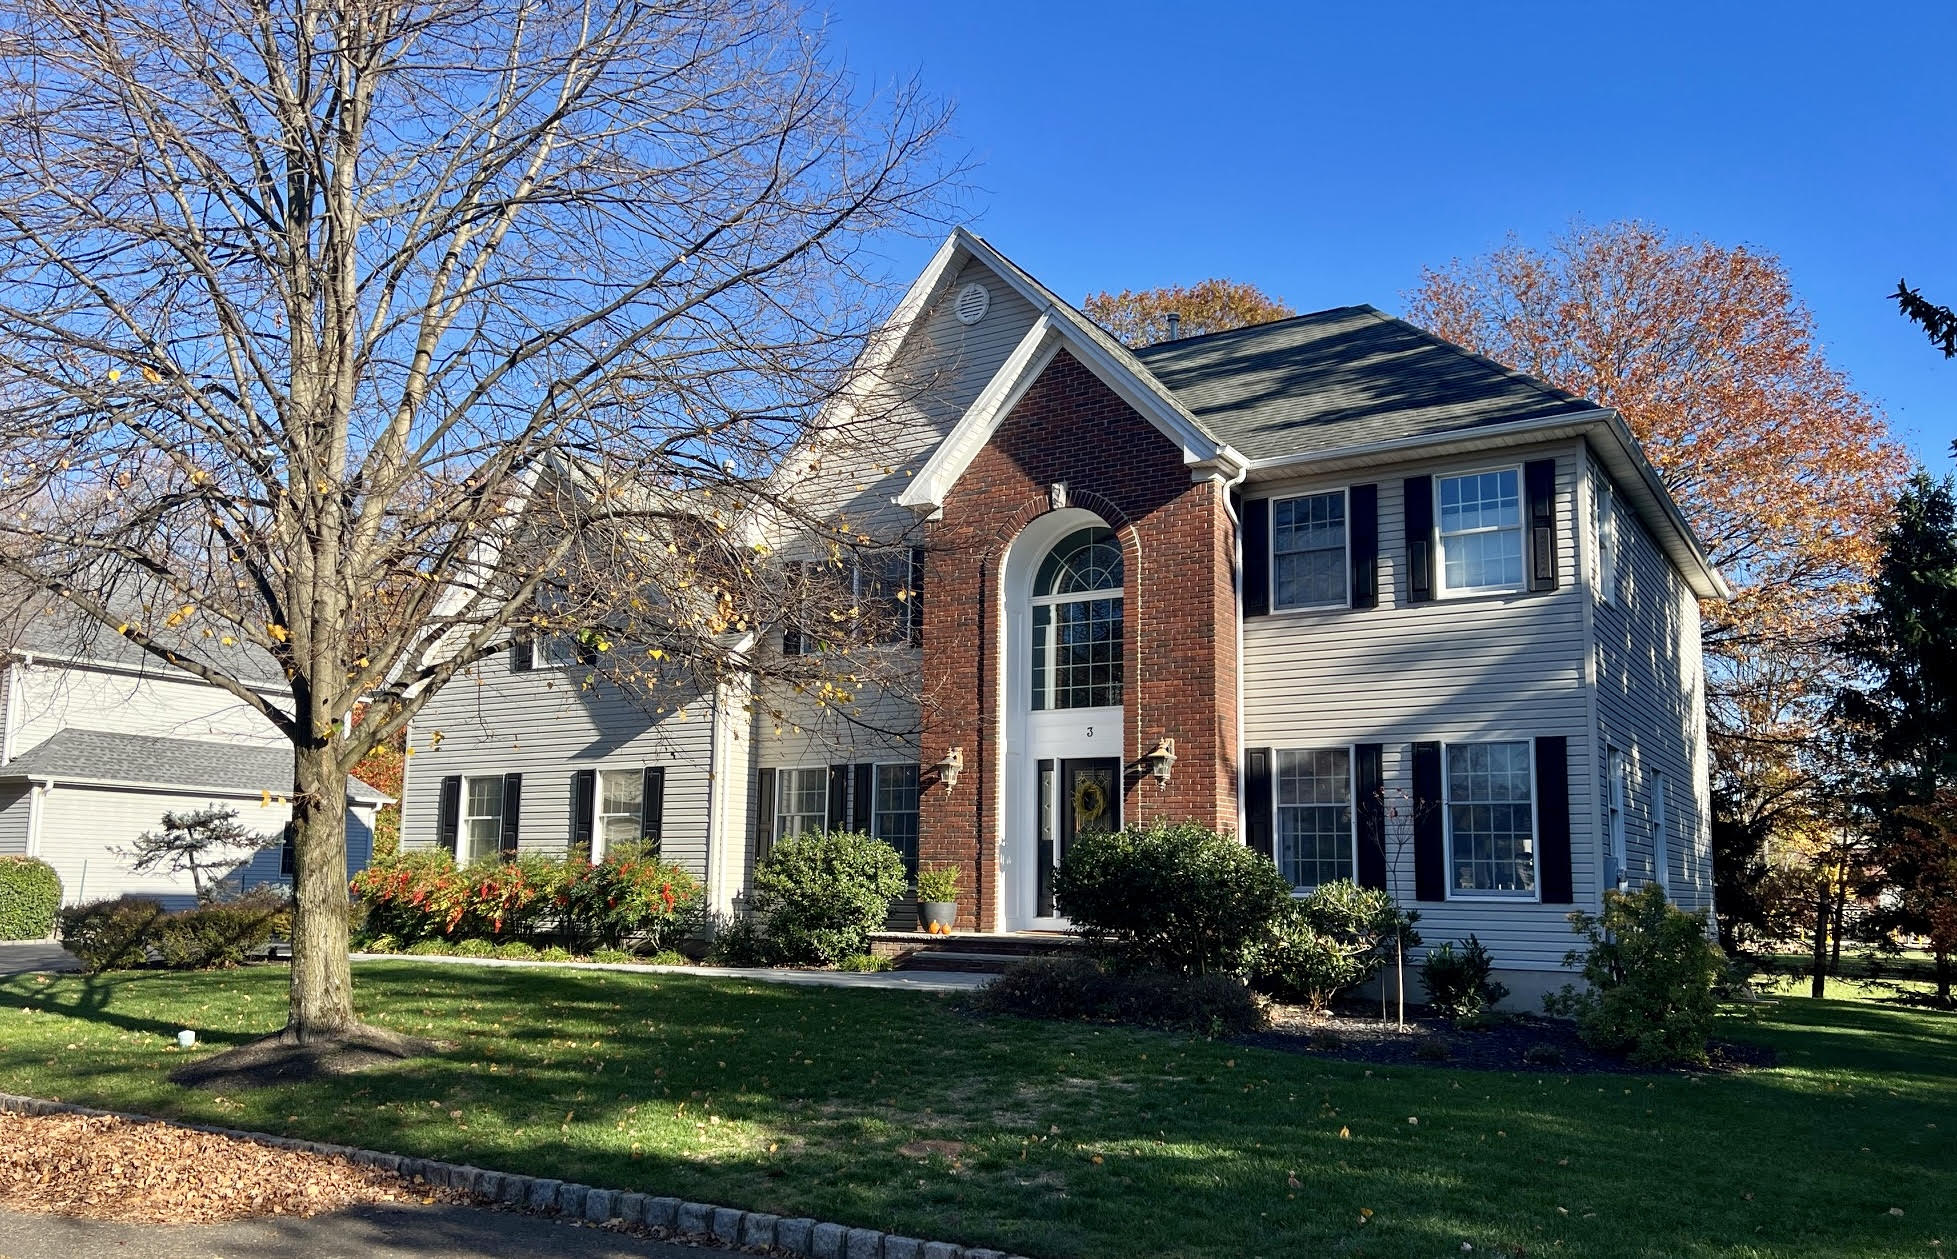 Homes for sale in Scotch Plains